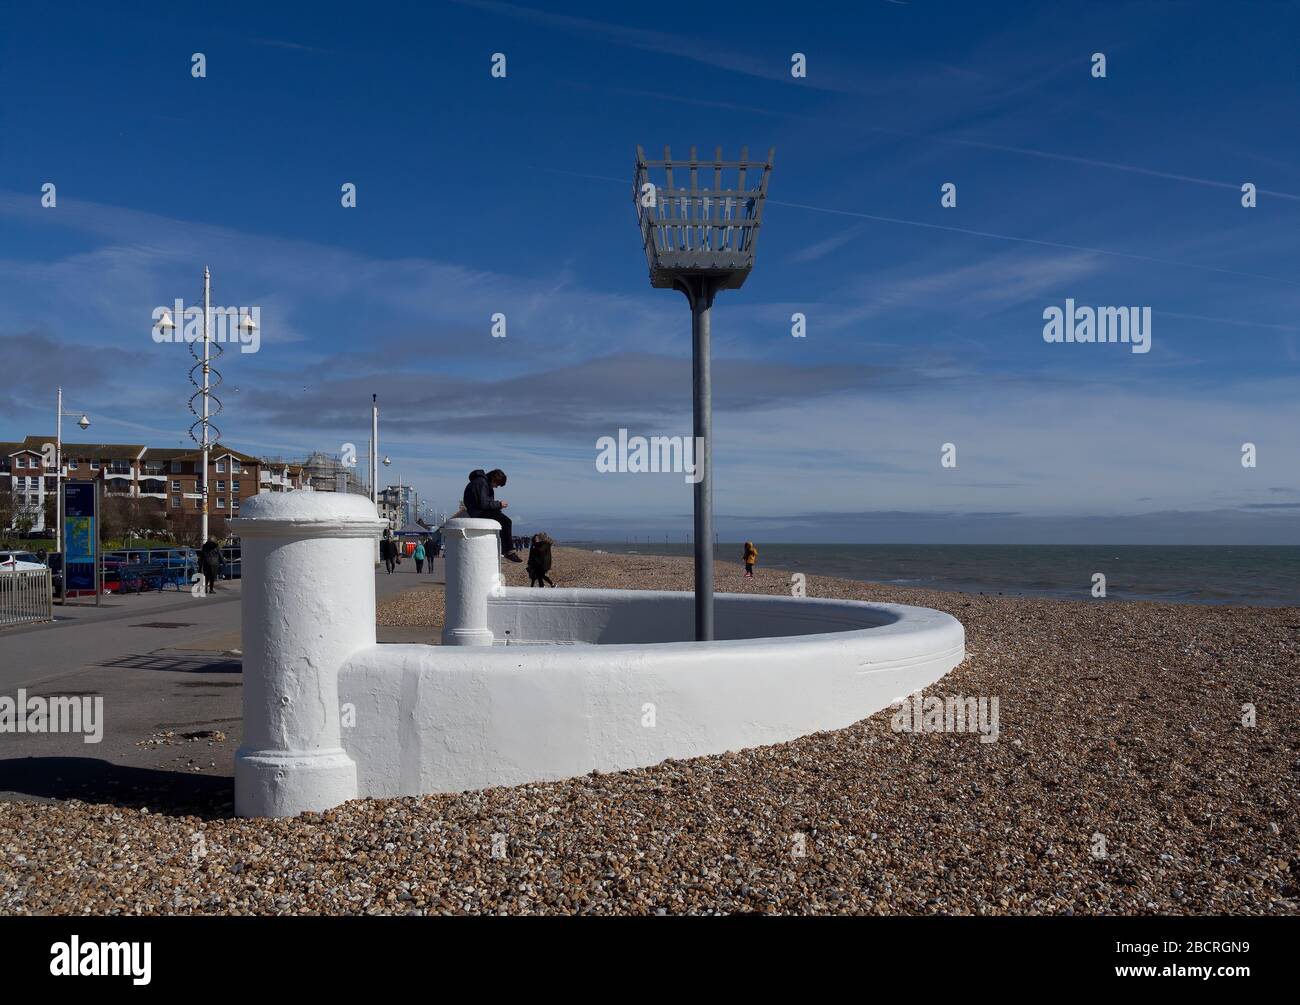 BOGNOR REGIS, SUSSEX, UK - March 14 2020: View of the Promenade with Millenium Beacon on seafront. Sunny day. Stock Photo